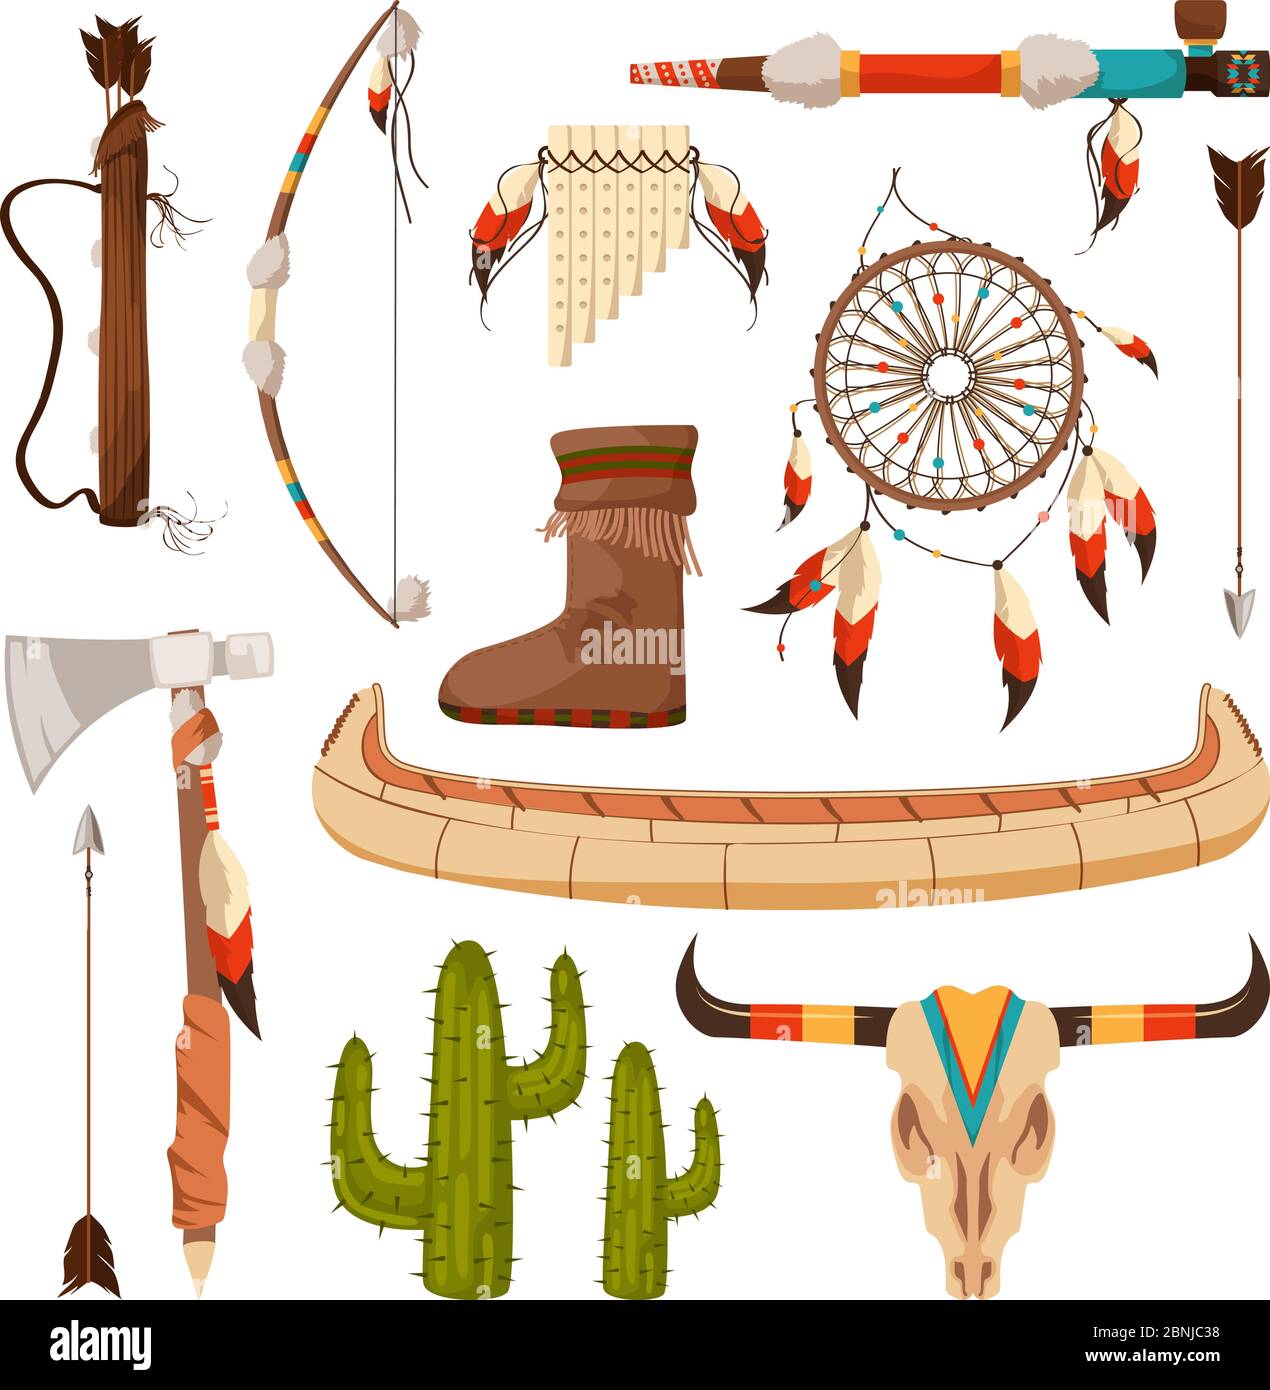 Ethnic and tribal elements and symbols of american indians Stock Vector